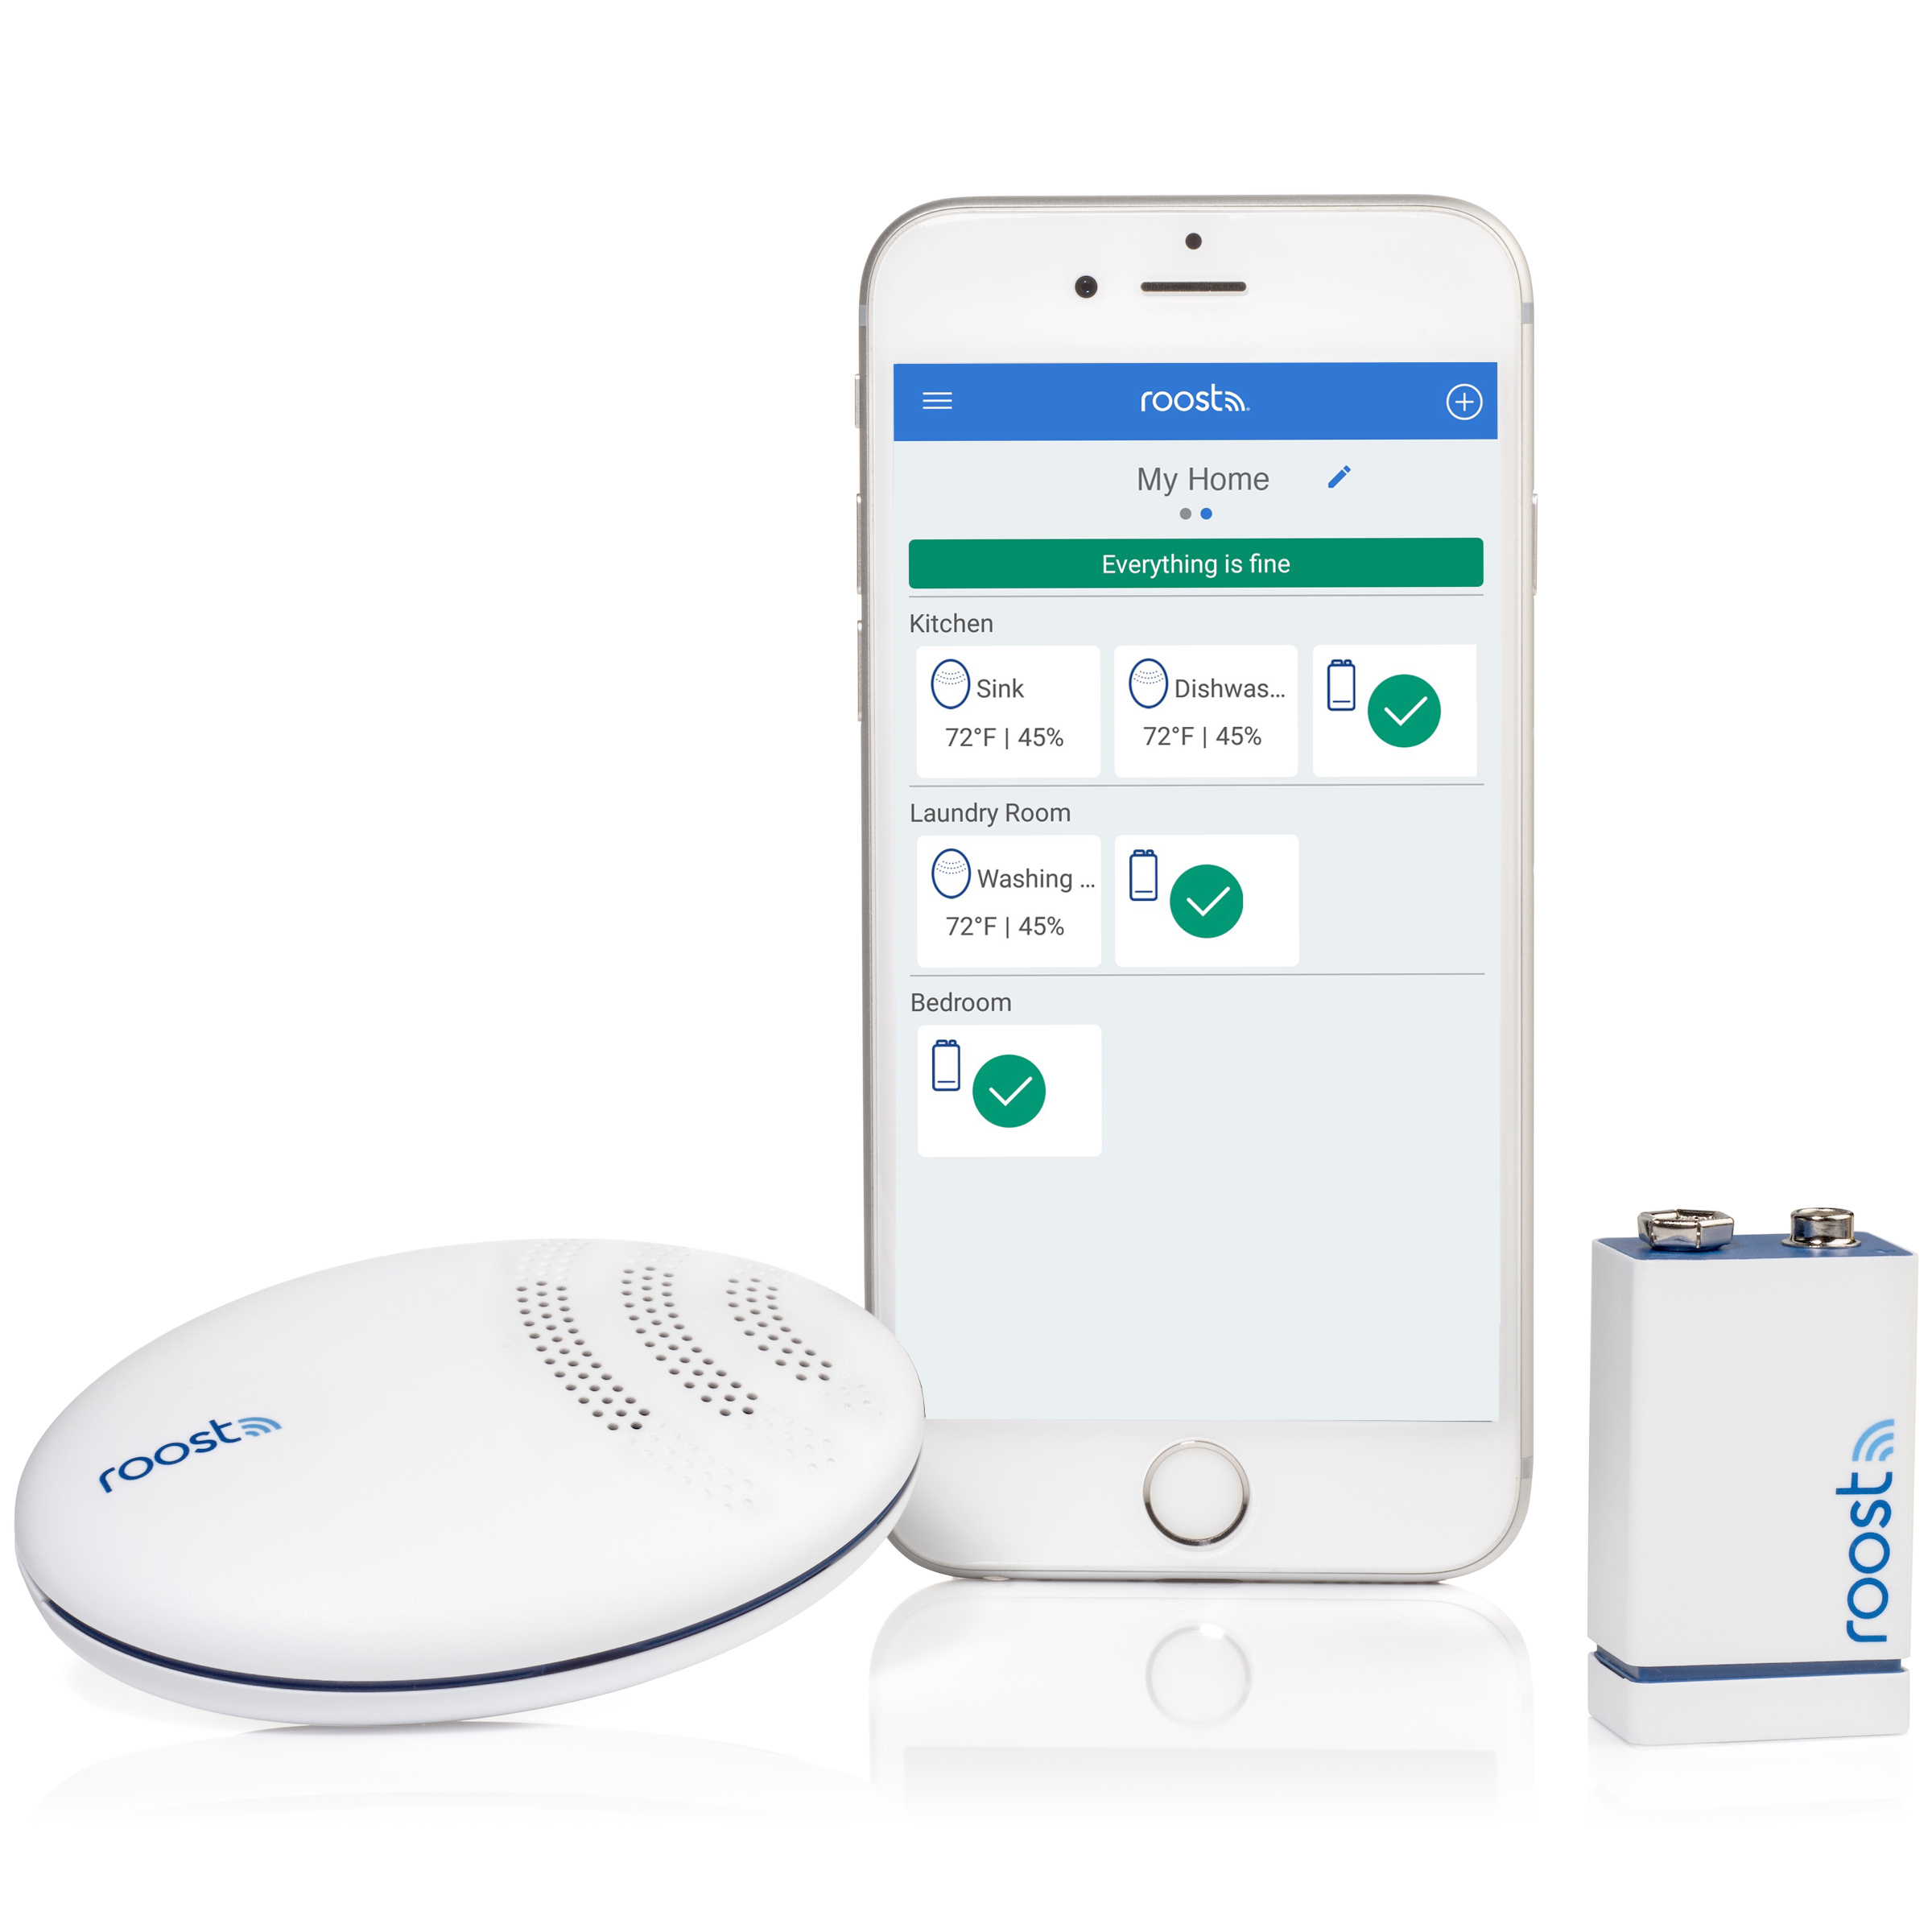 Roost Mobile App, Roost Smart Battery and Roost Smart Water Leak and Freeze Detector